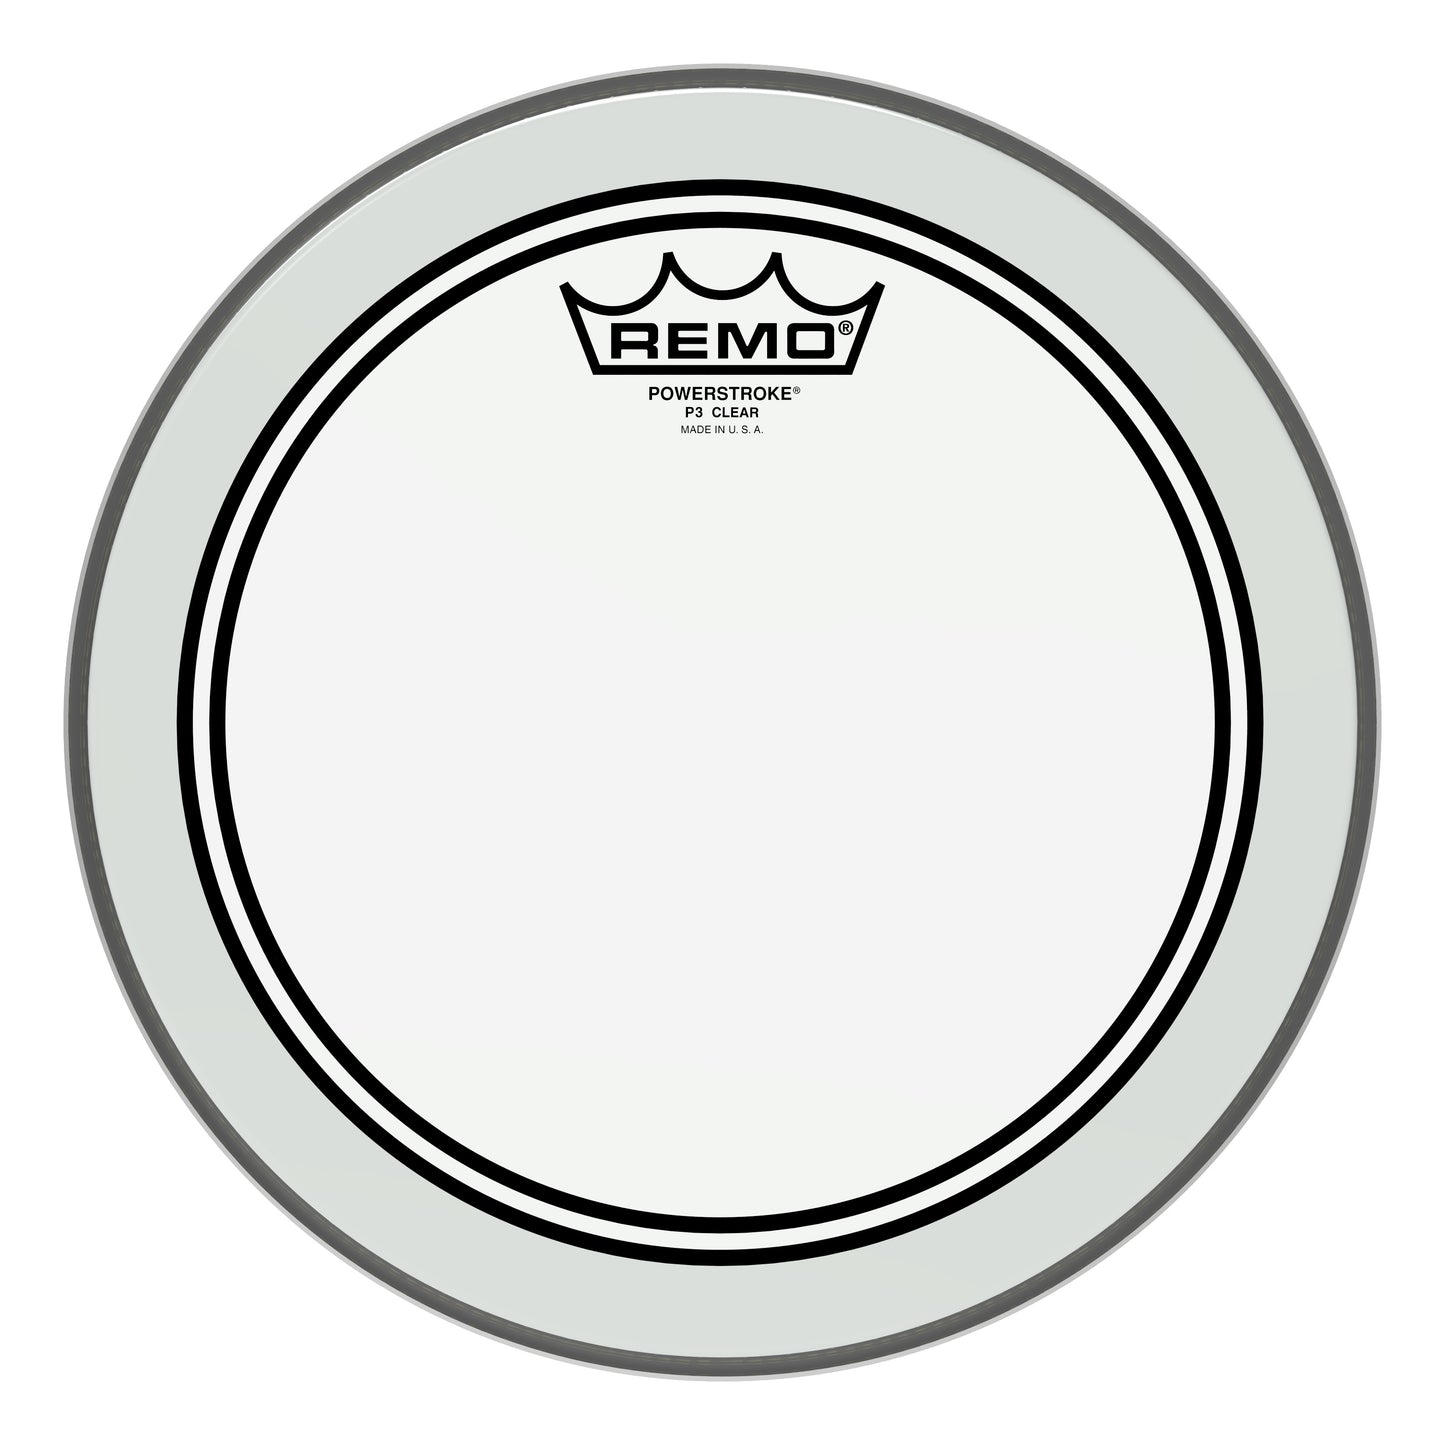 Remo Powerstroke® P3 Clear Drumhead, 10"